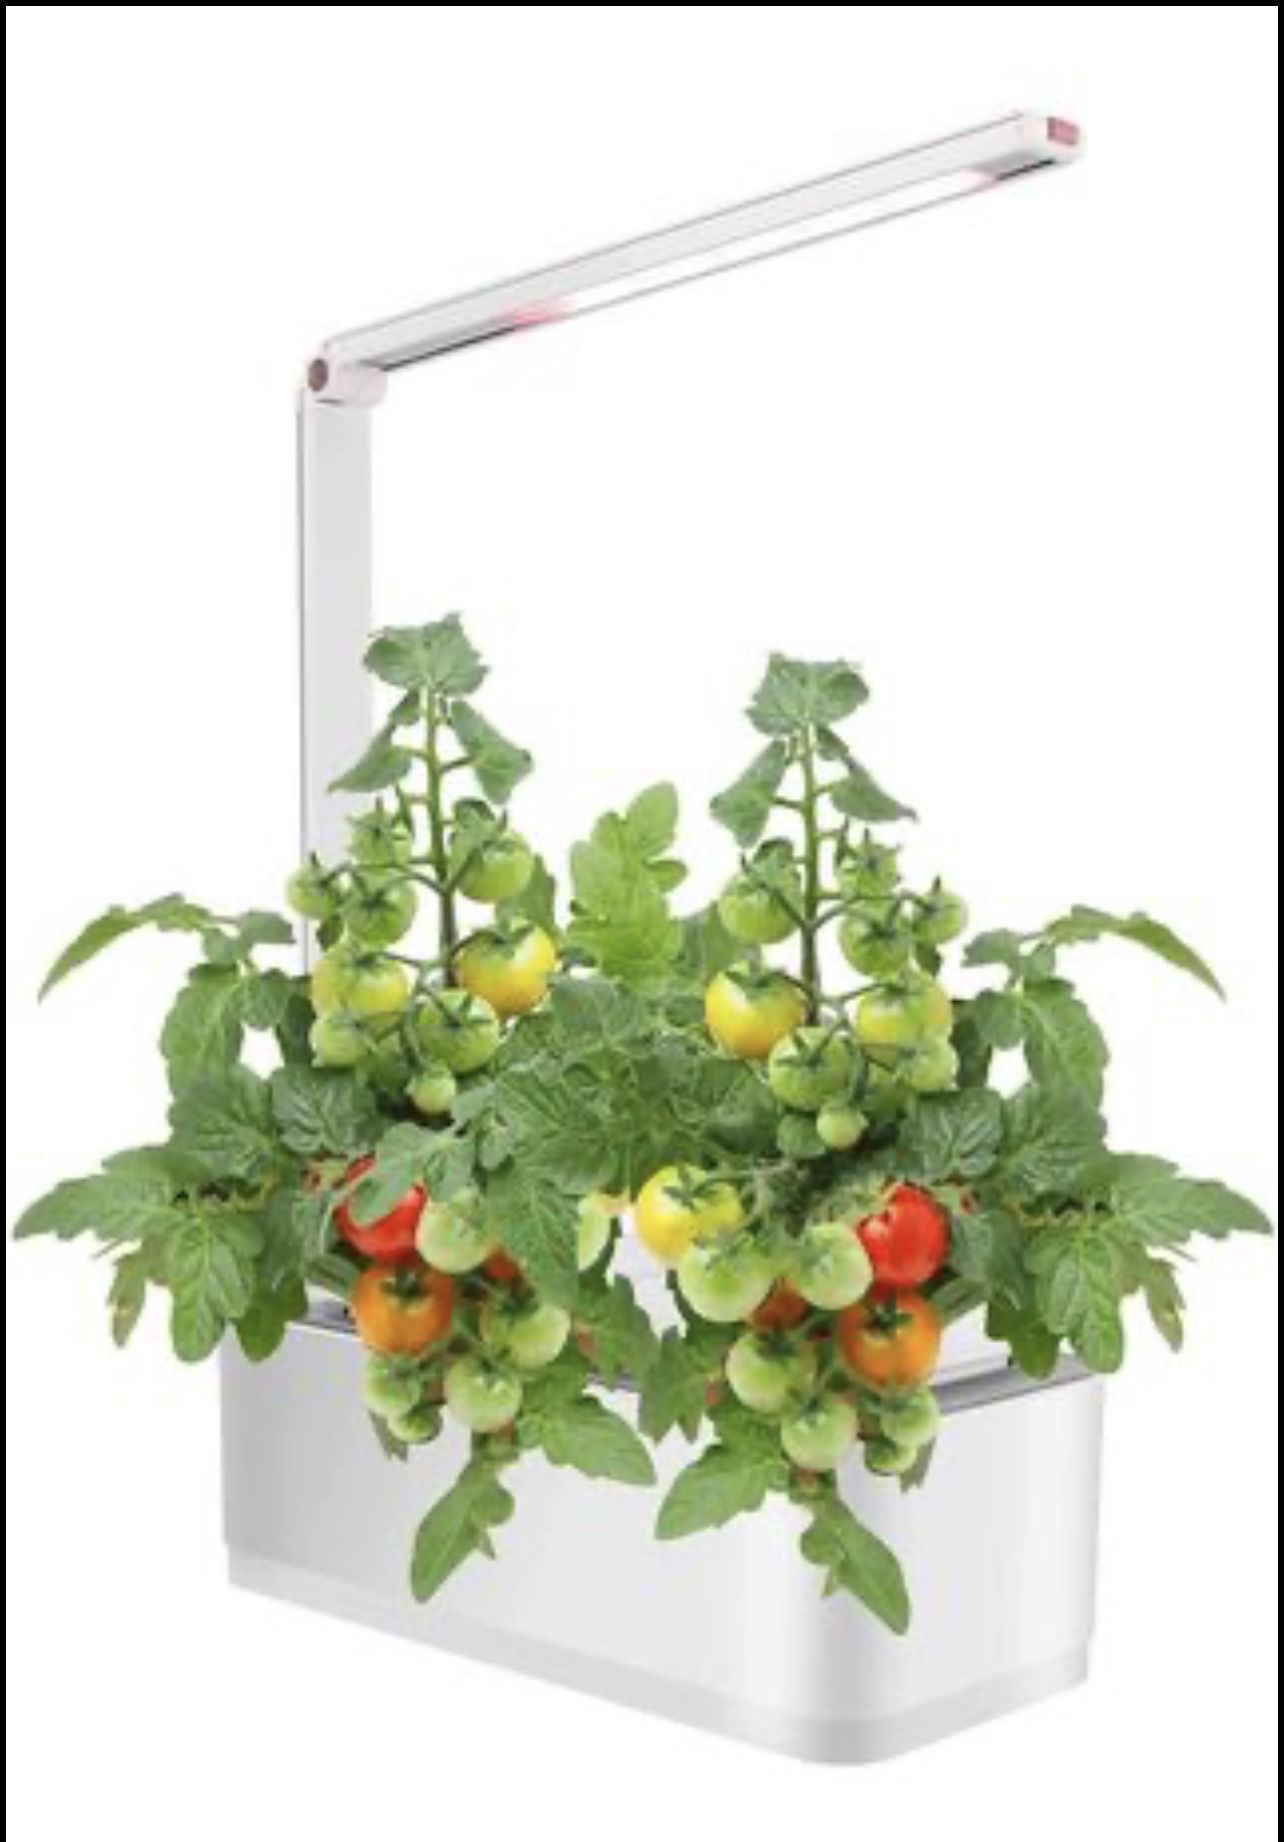 Hydroponic Indoor Plant Growing System